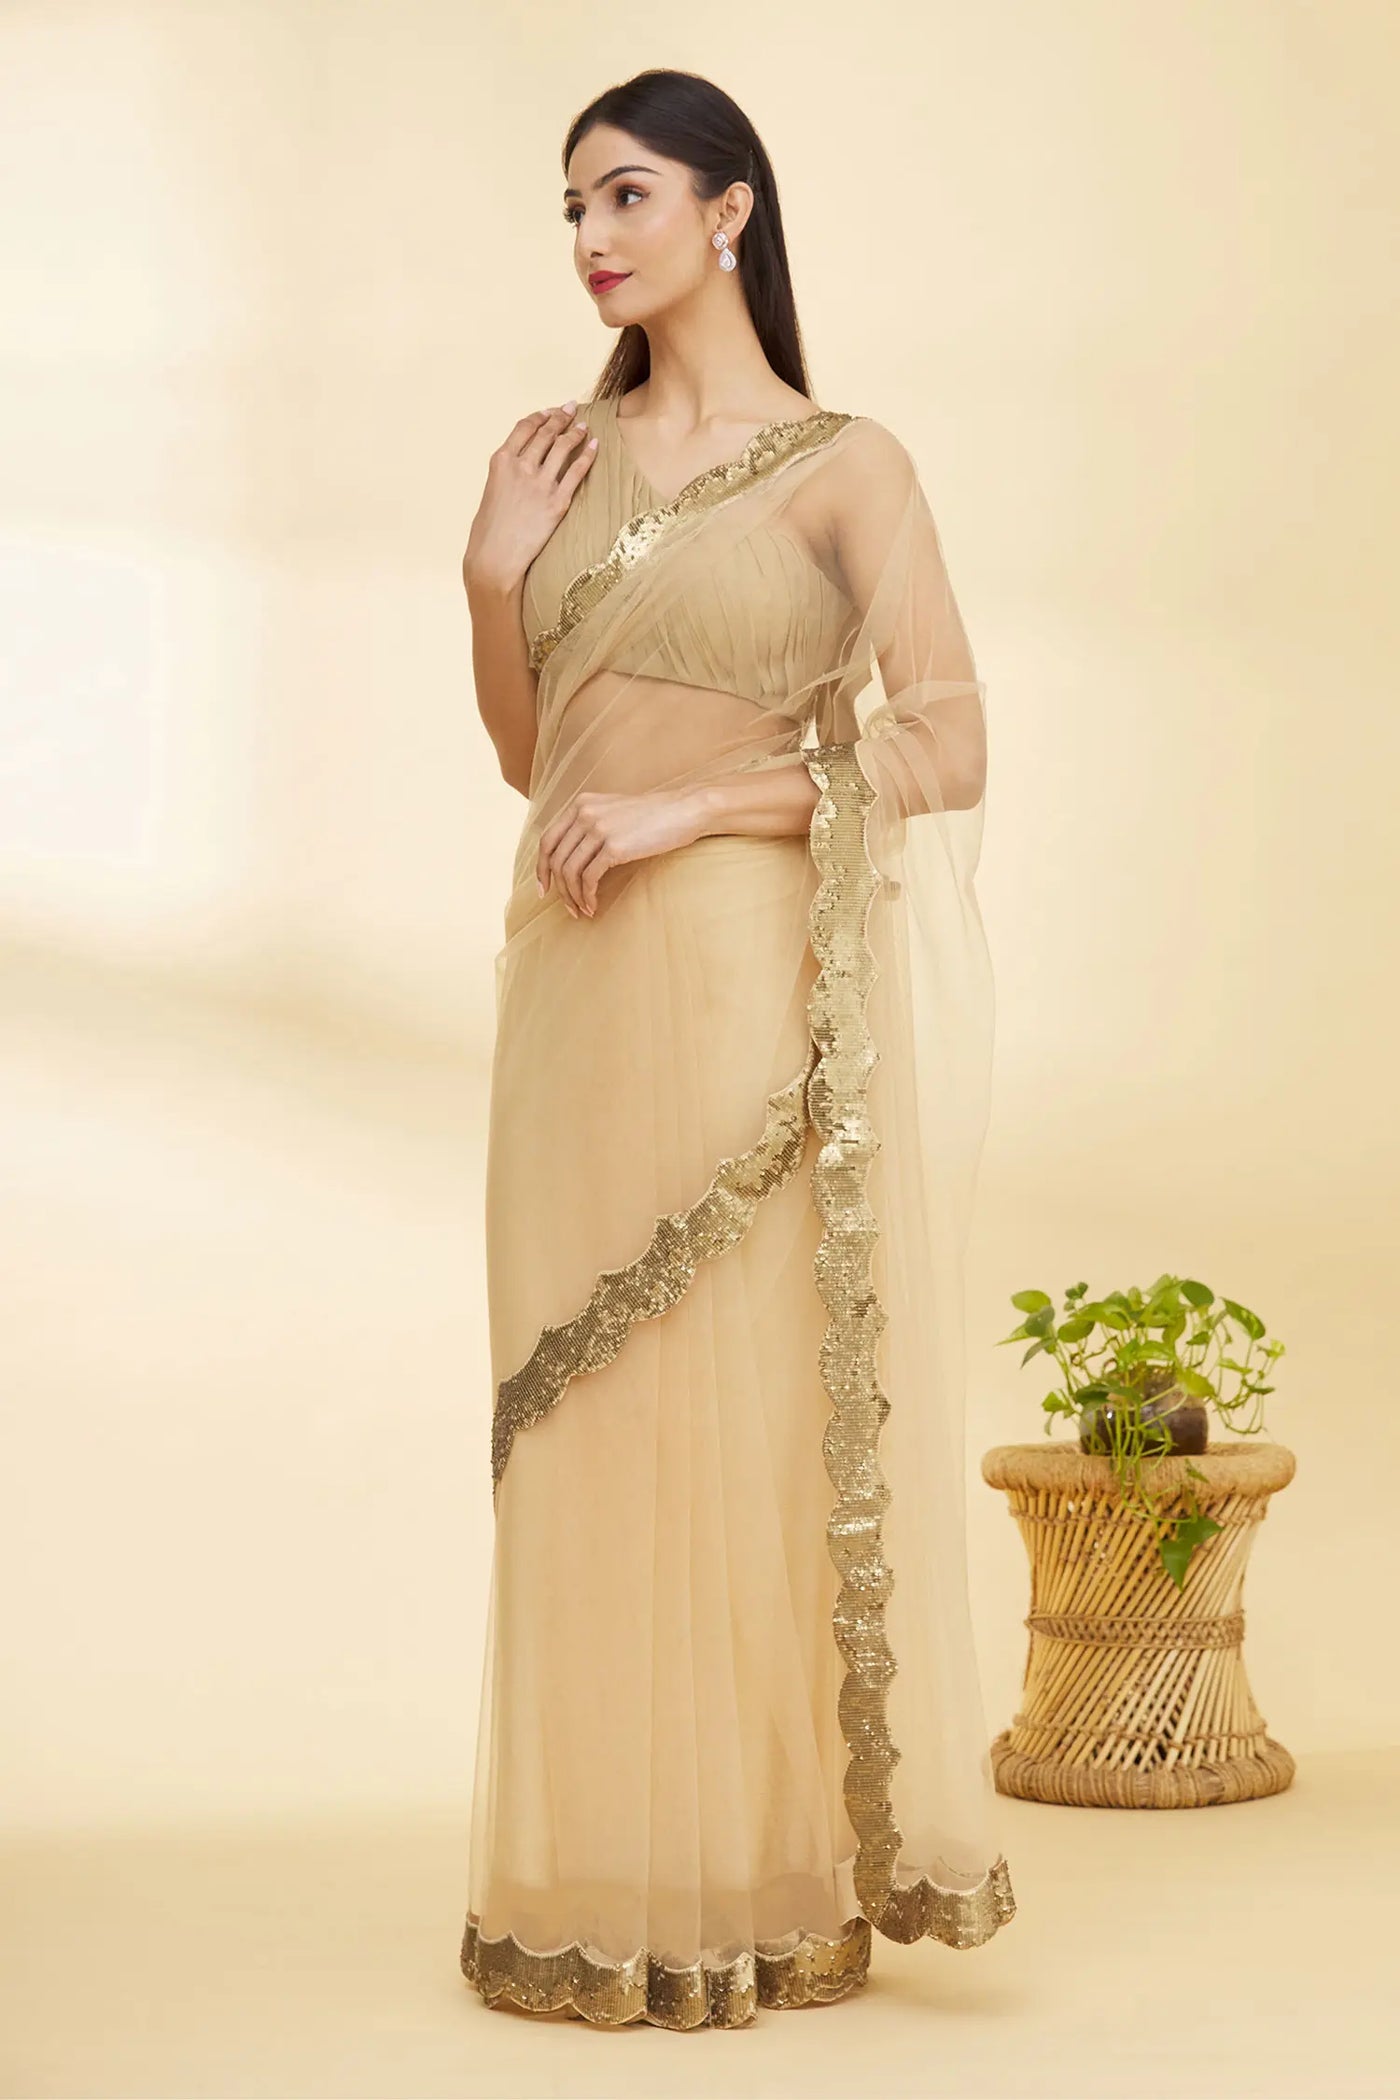 Beige Scalloped Hem Saree - Indian Clothing in Denver, CO, Aurora, CO, Boulder, CO, Fort Collins, CO, Colorado Springs, CO, Parker, CO, Highlands Ranch, CO, Cherry Creek, CO, Centennial, CO, and Longmont, CO. Nationwide shipping USA - India Fashion X